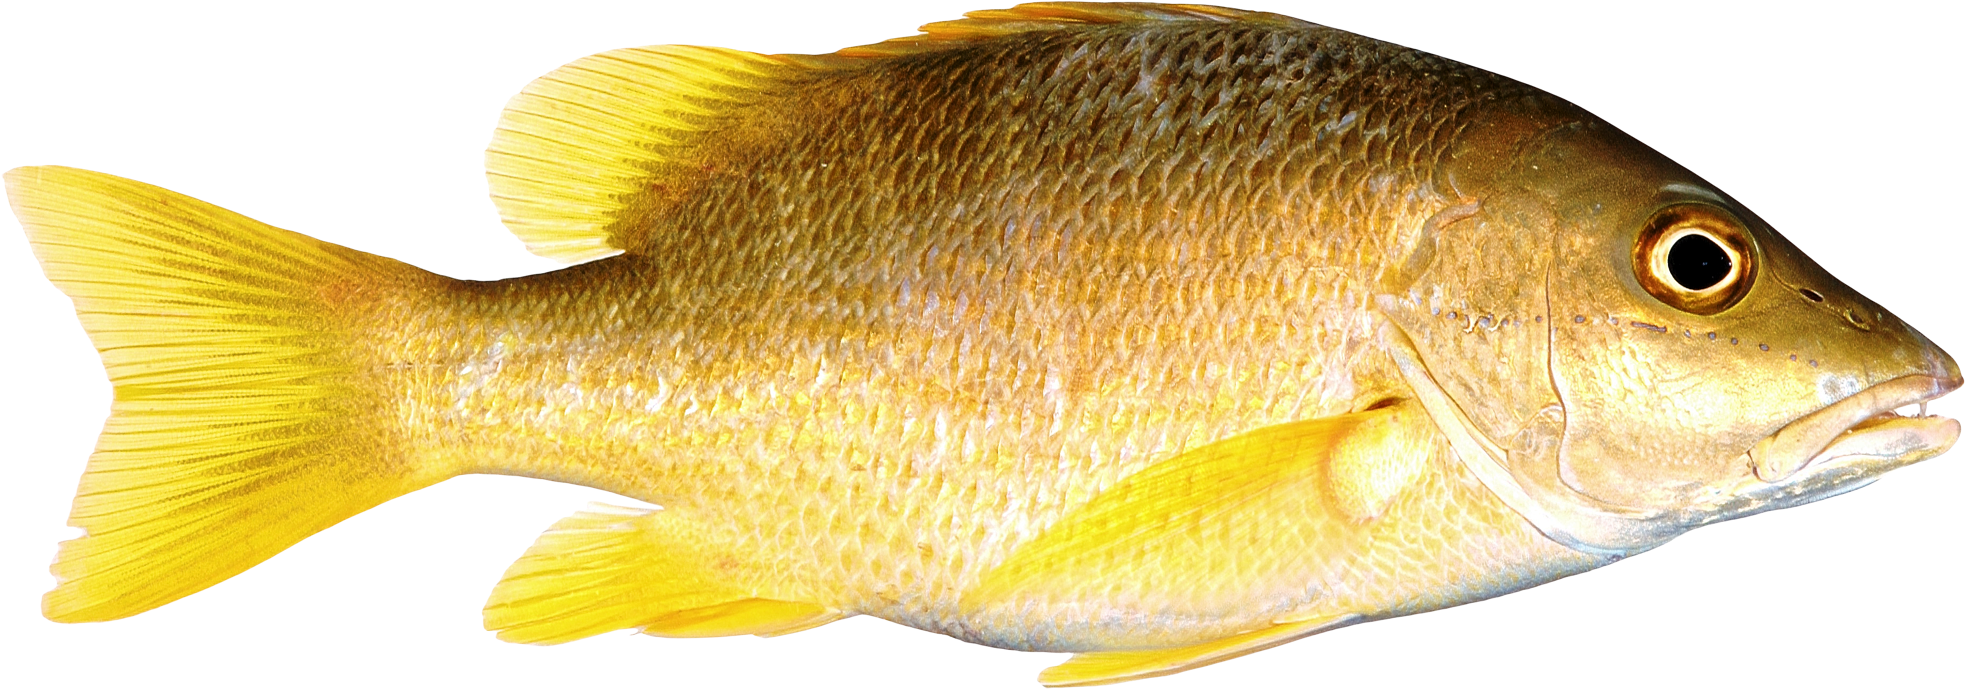 Fish Png Image - Fish With Transparent Background, Png Download